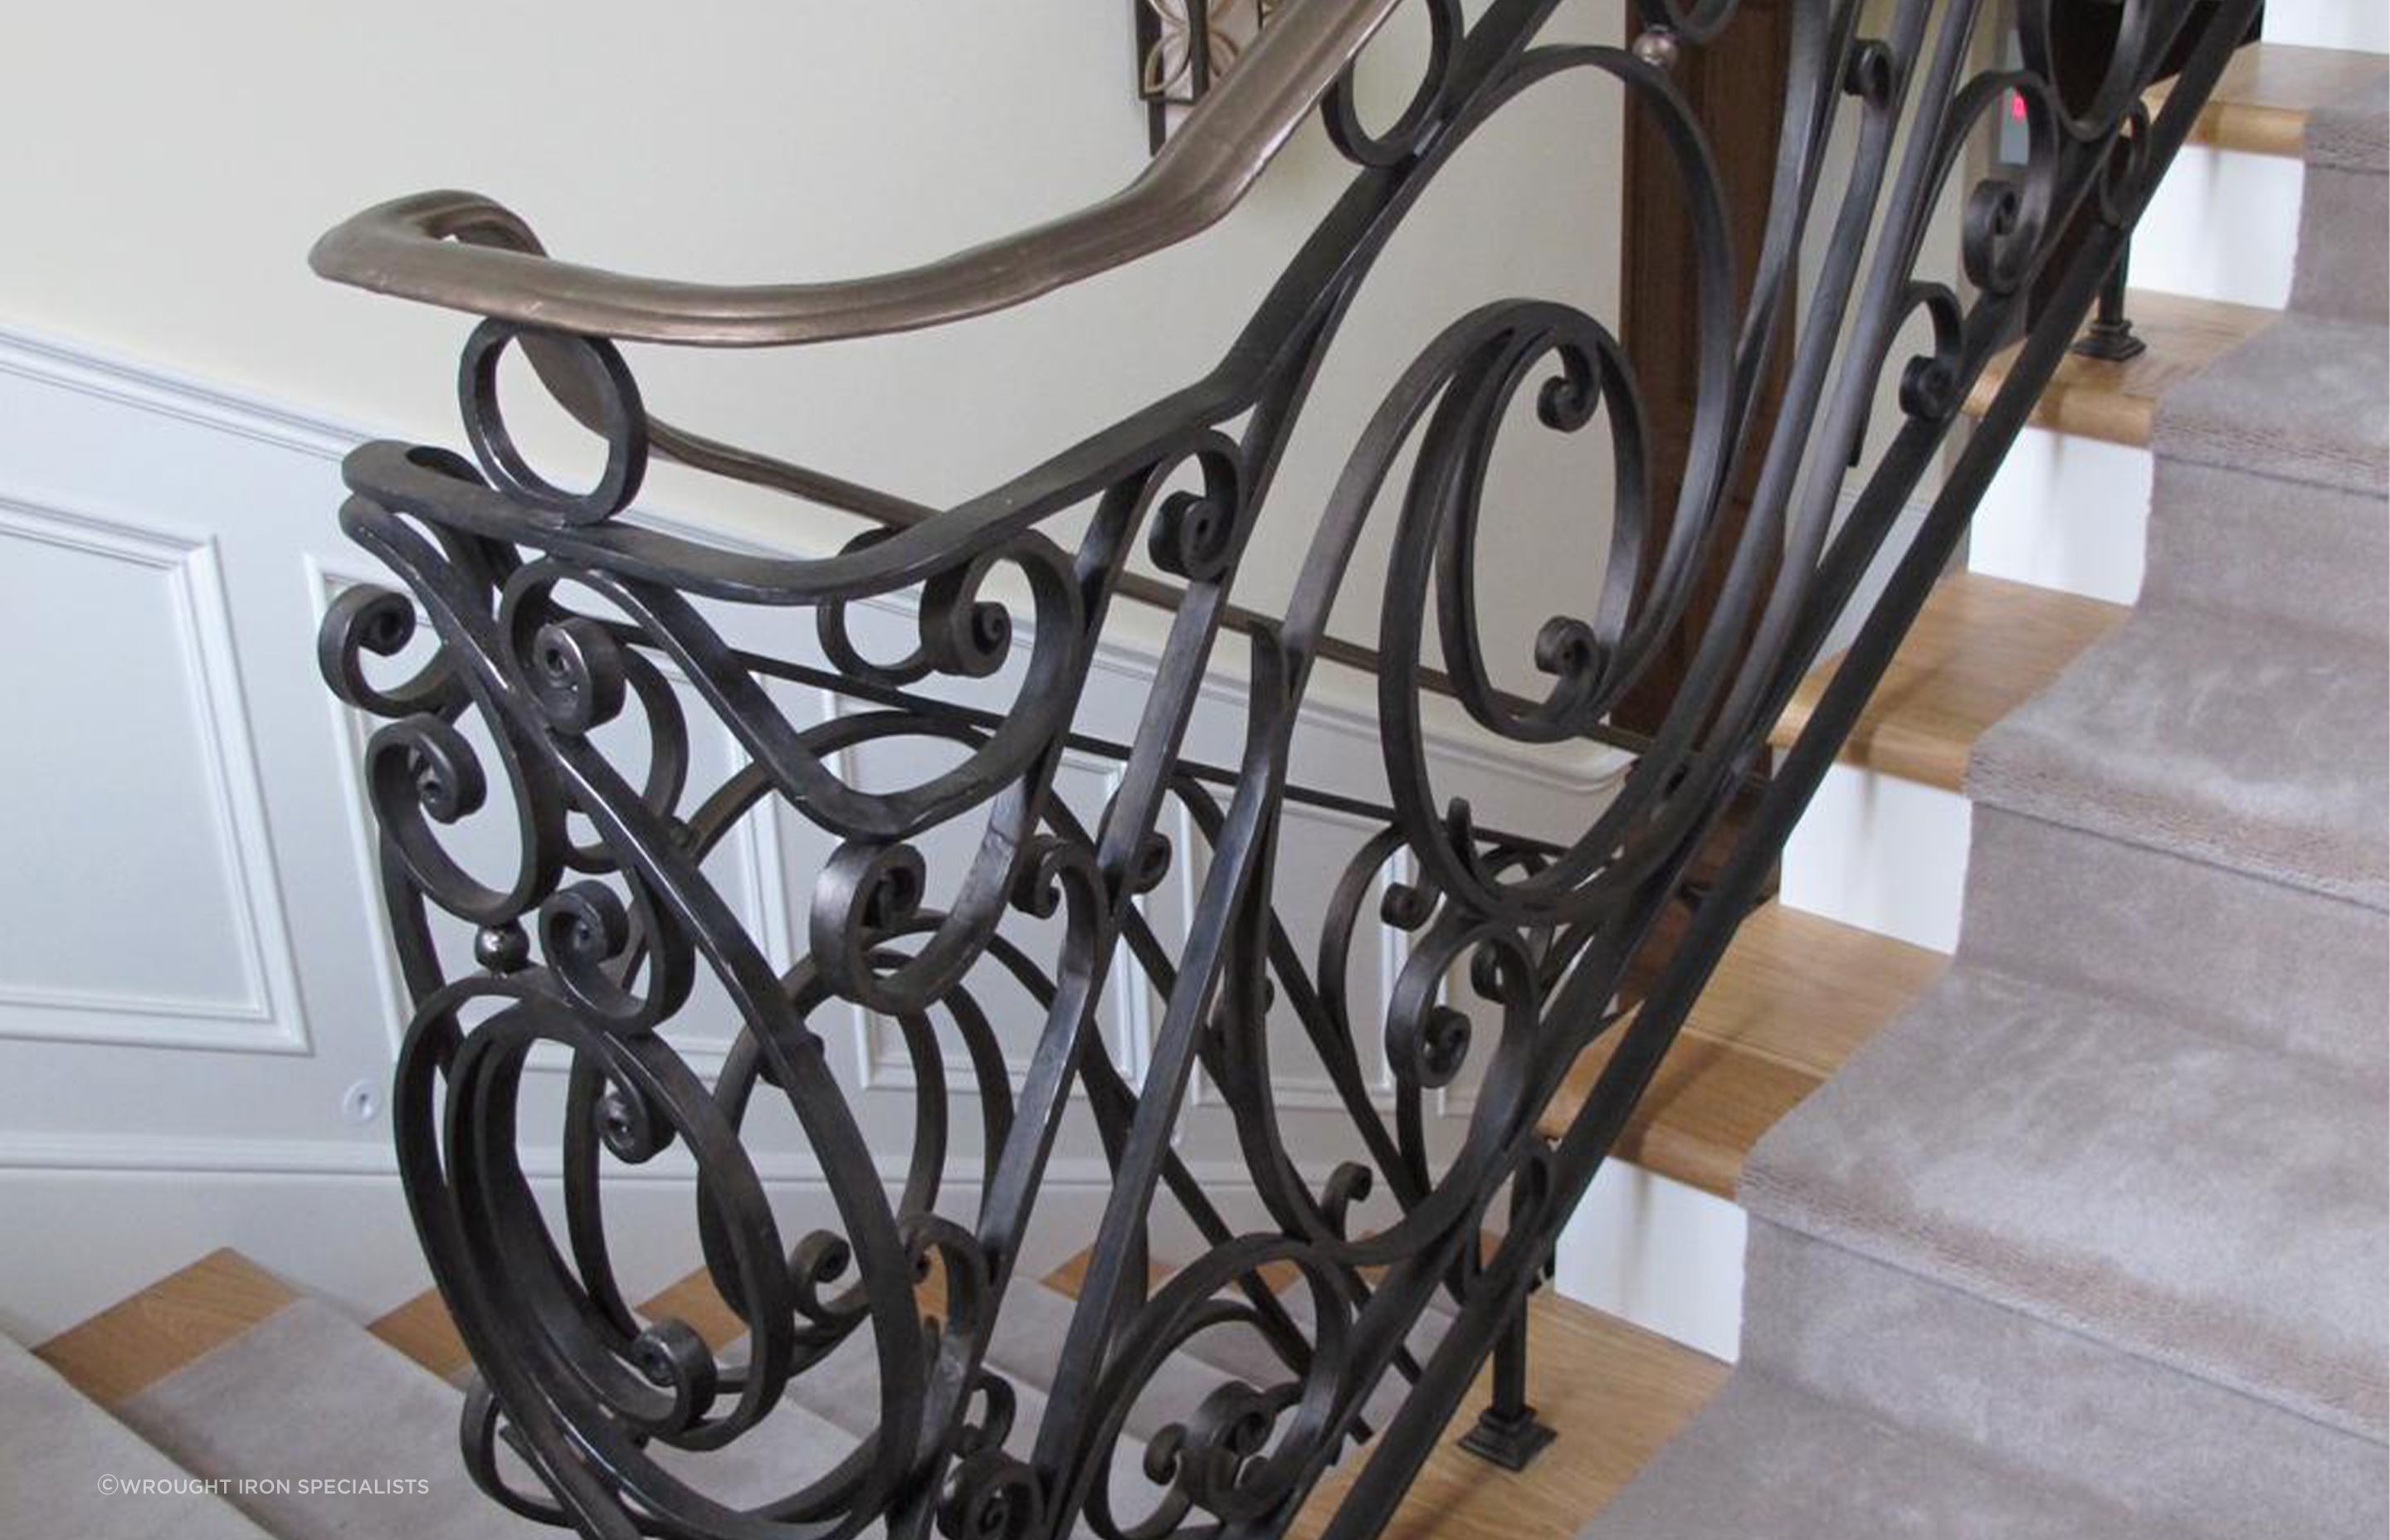 Features that take inspiration from organic shapes, like this custom balustrade from Wrought-Iron Specialists, can enhance the feelings of natural connection in the home.